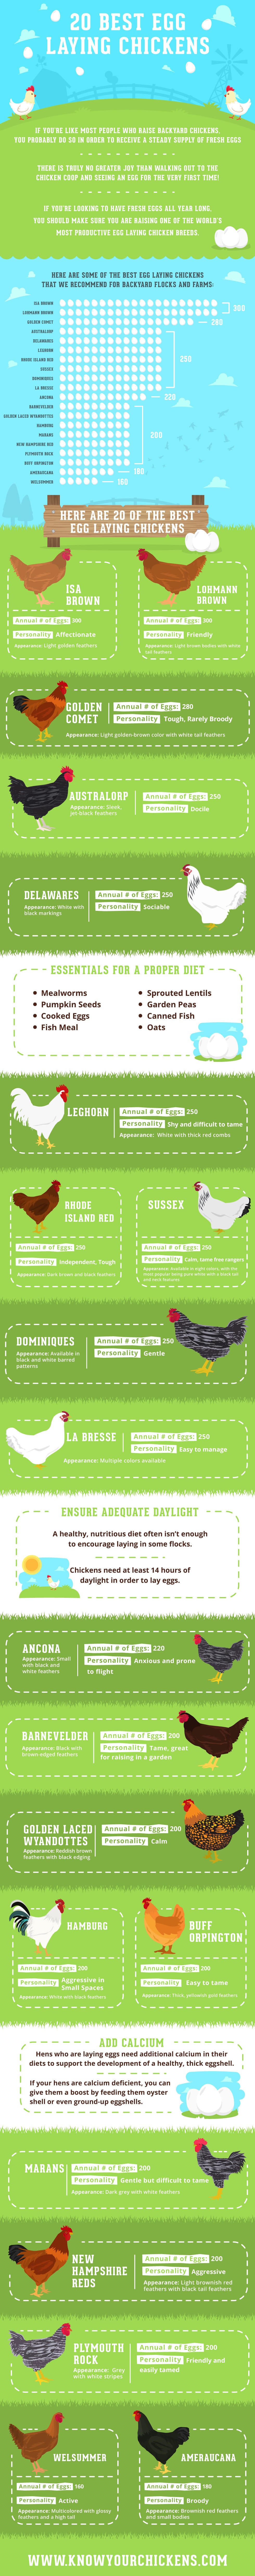 Best Egg Laying Chickens Infographic